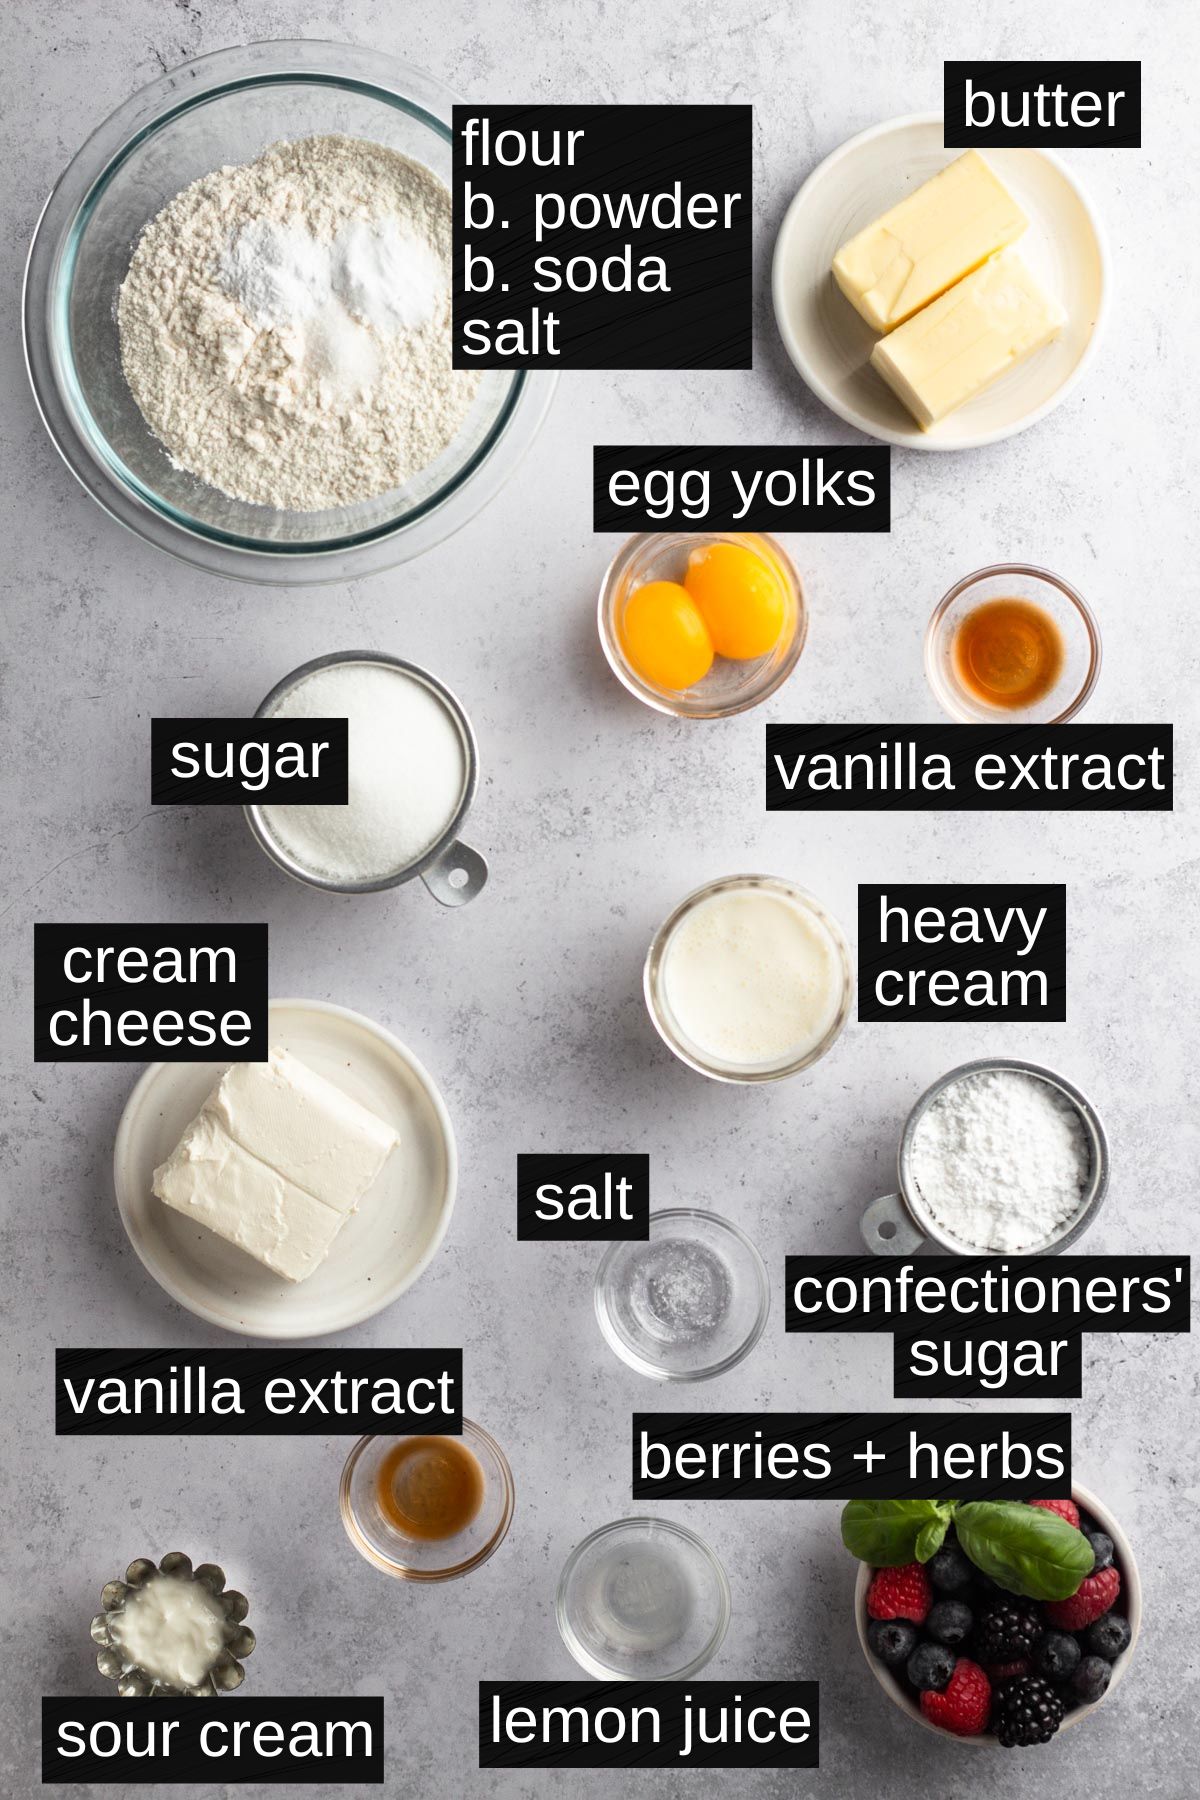 Recipe ingredients with labels on a gray surface.